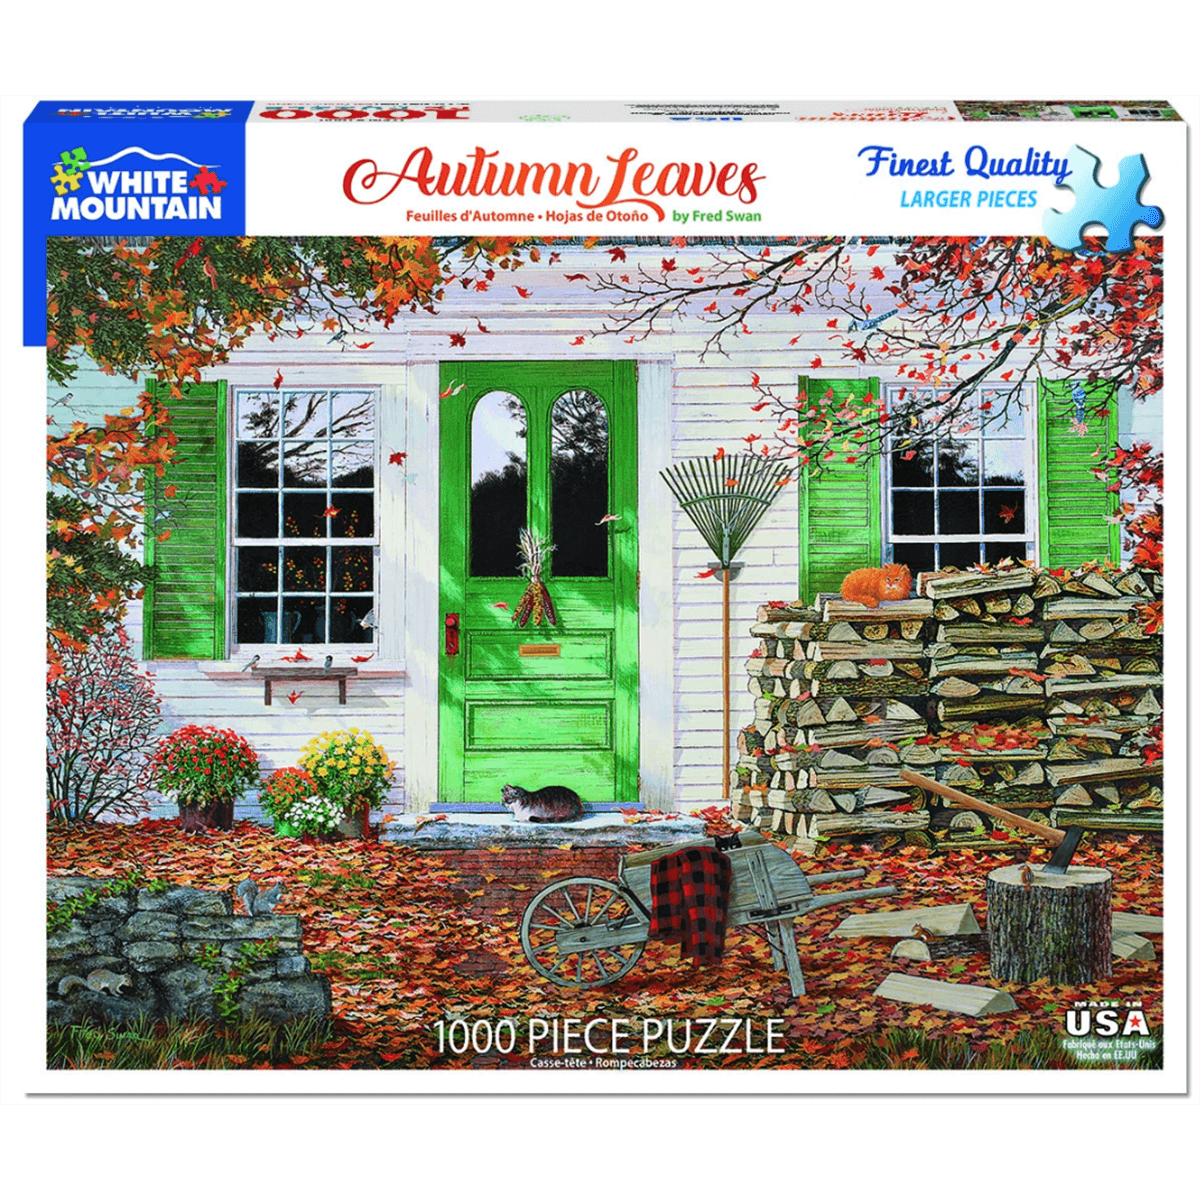 White Mountain Puzzles Autumn Leaves 1000 Piece Jigsaw Puzzle